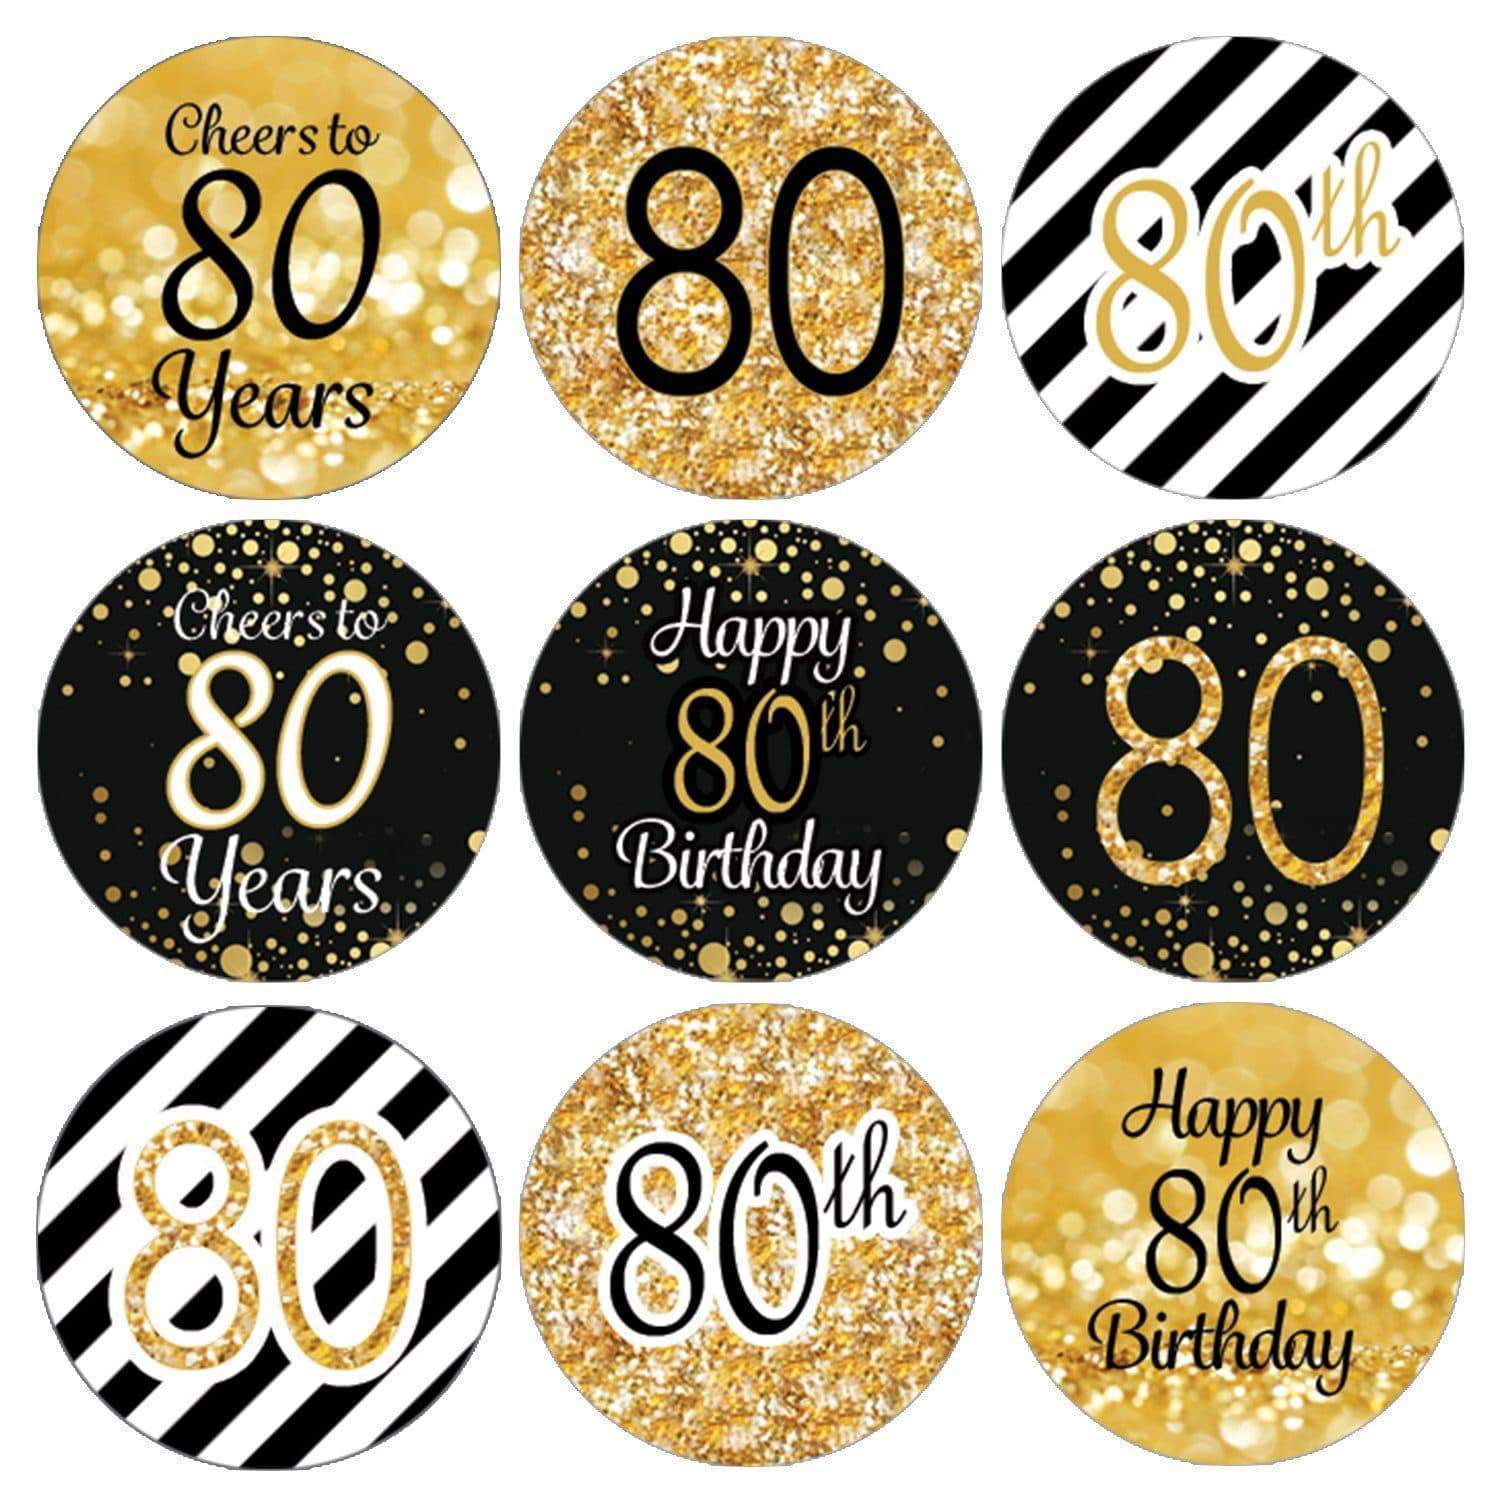 40 Count Mini Candy Bar Wrapper Stickers Birthday Party Small Favors Gold Adult 80th Birthday